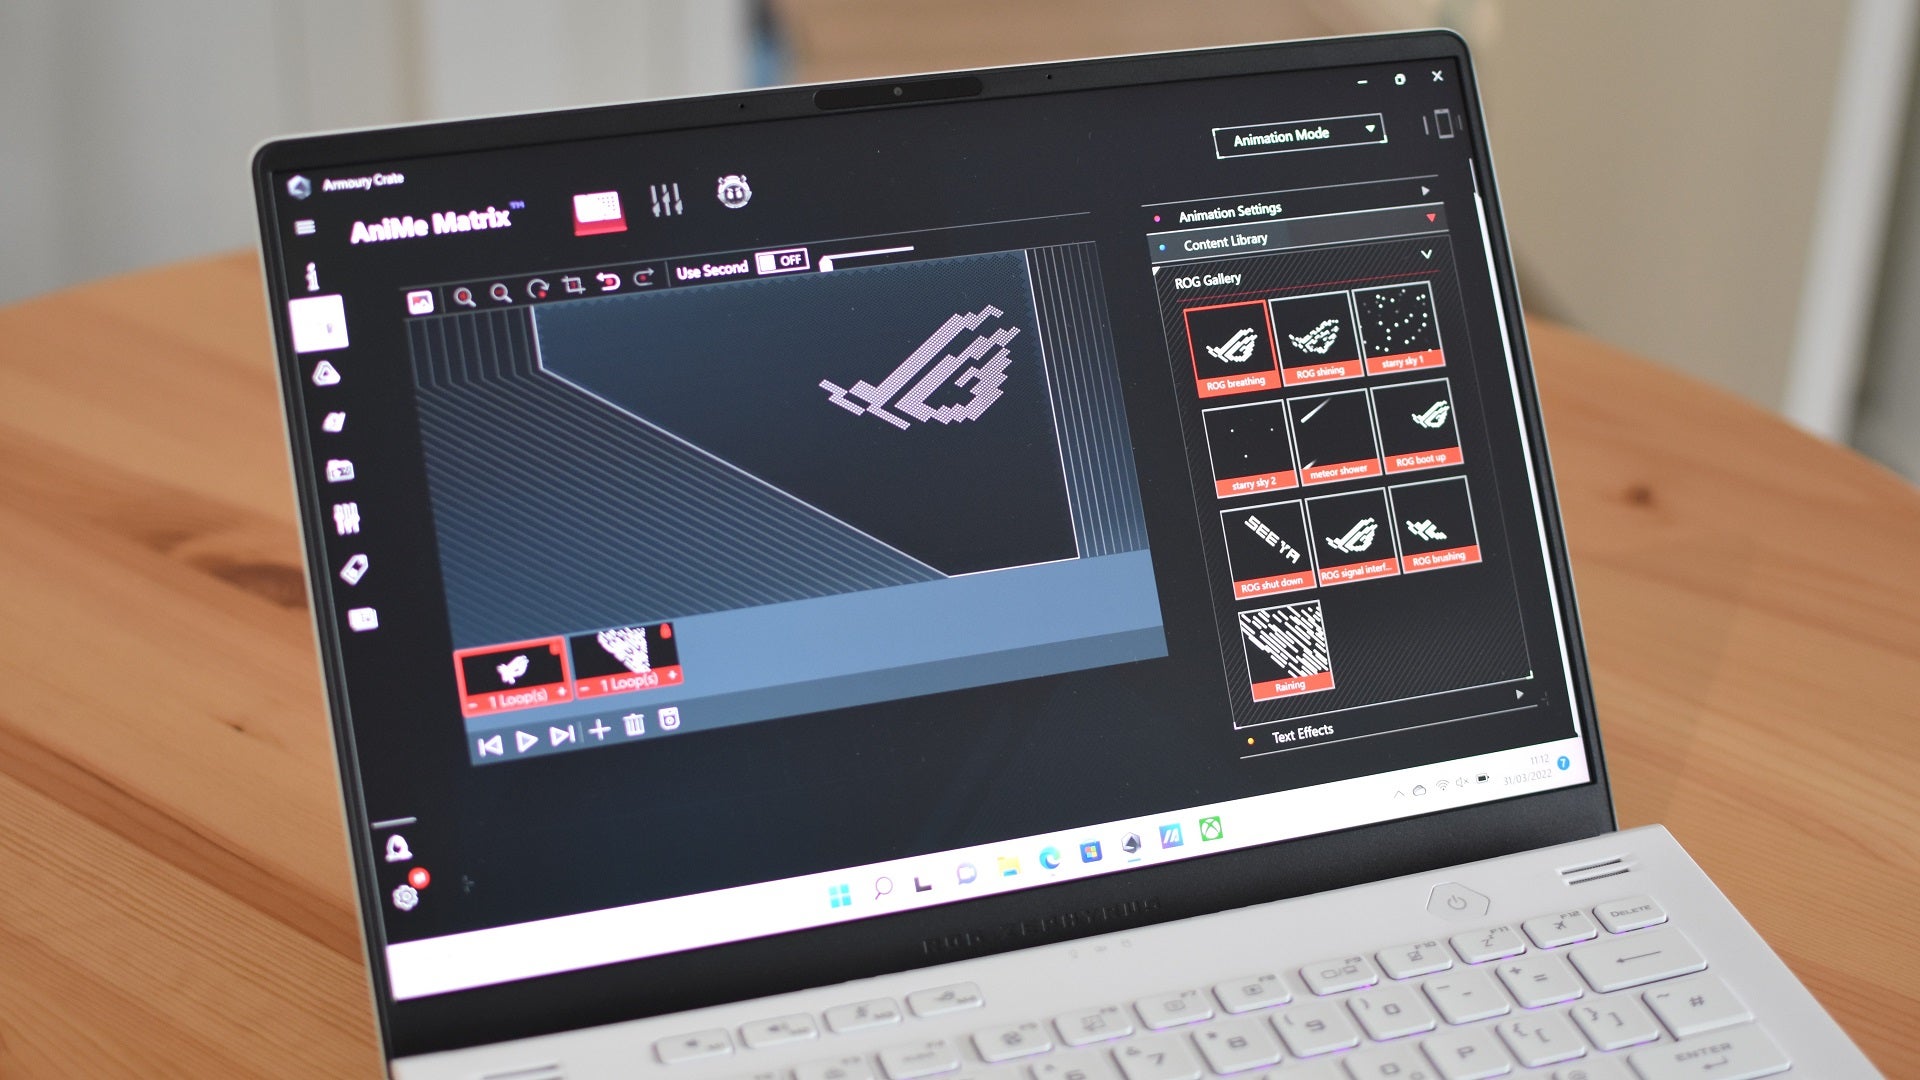 The Asus ROG Zephyrus G14 screen showing Asus' ROG Armoury software.